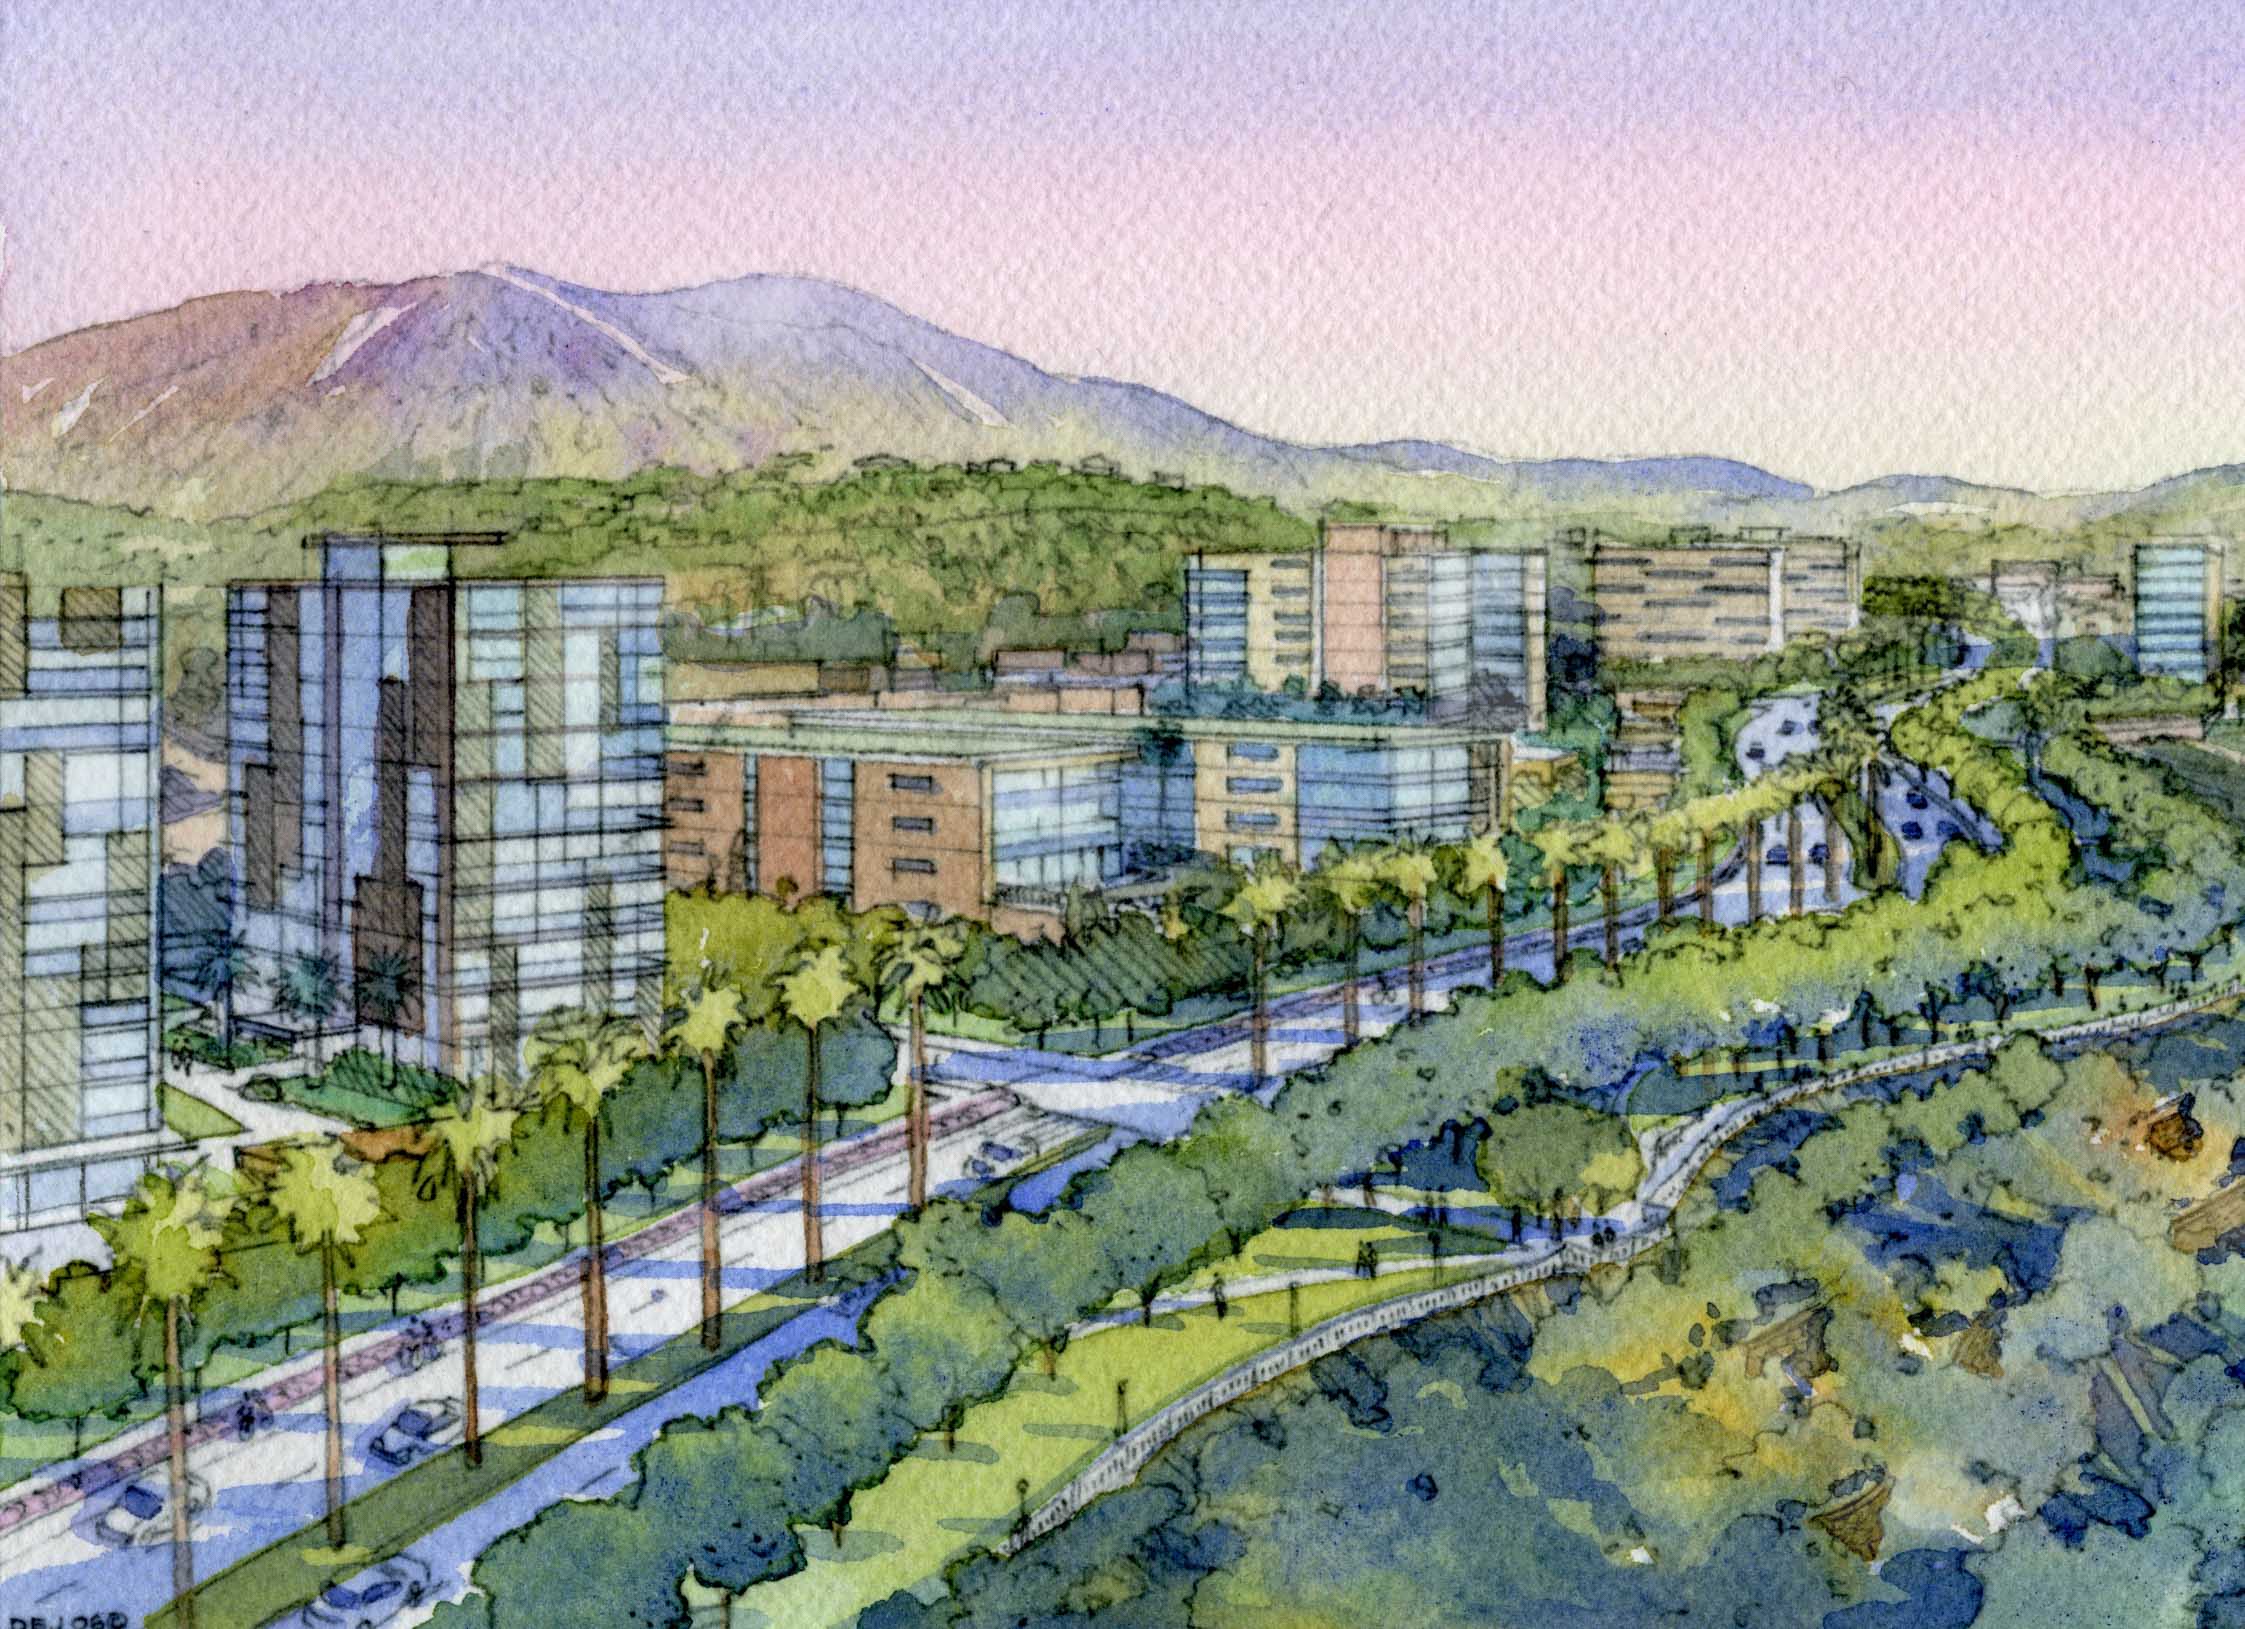 Sketch of the future NBC Universal with green landscape and buildings